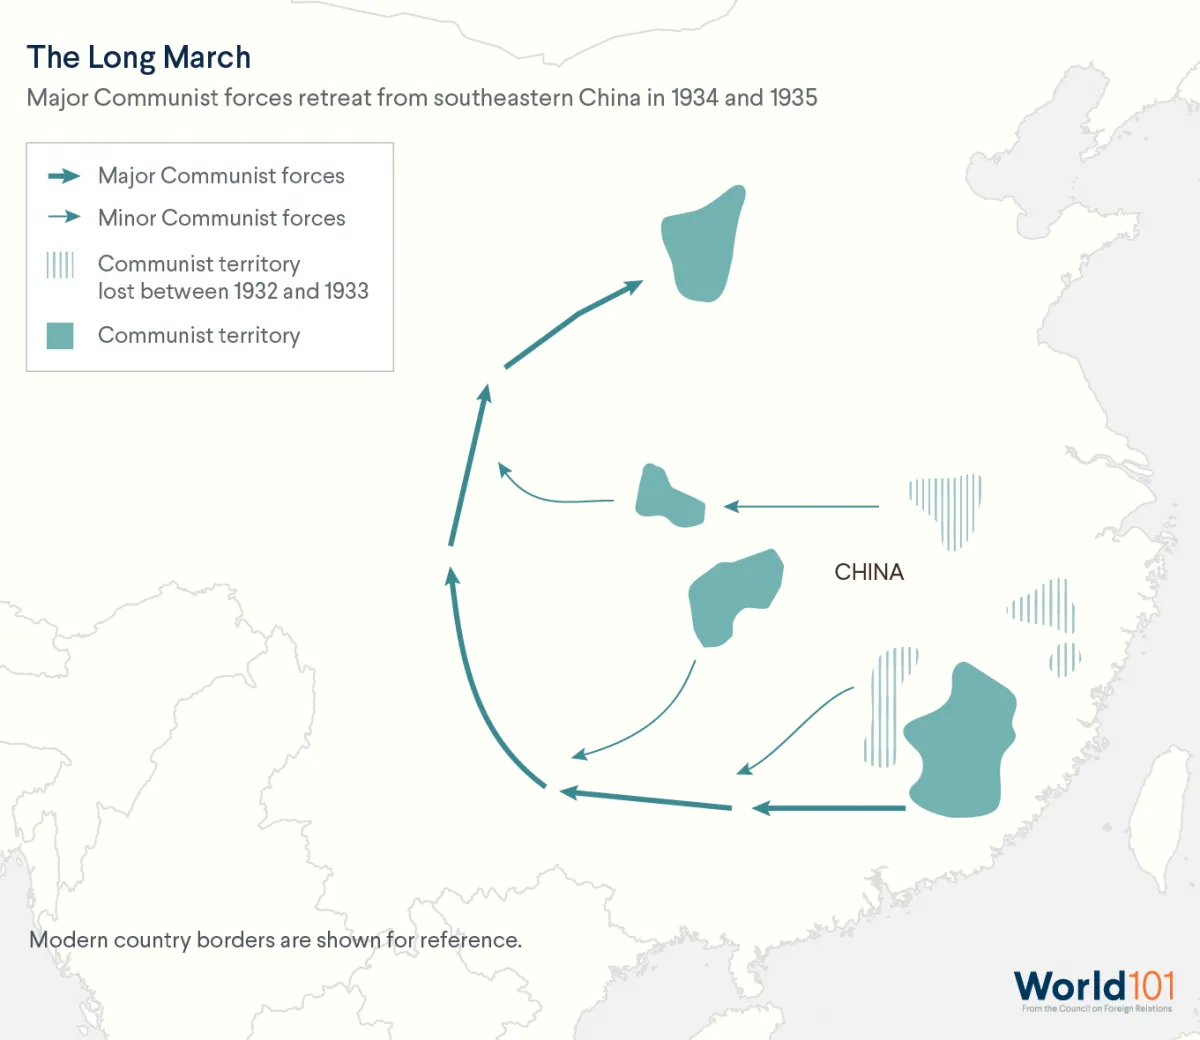 Map showing The Long March, the route major communist forces followed while retreating from southeastern China in 1934 and 1935. For more info contact us at world101@cfr.org.